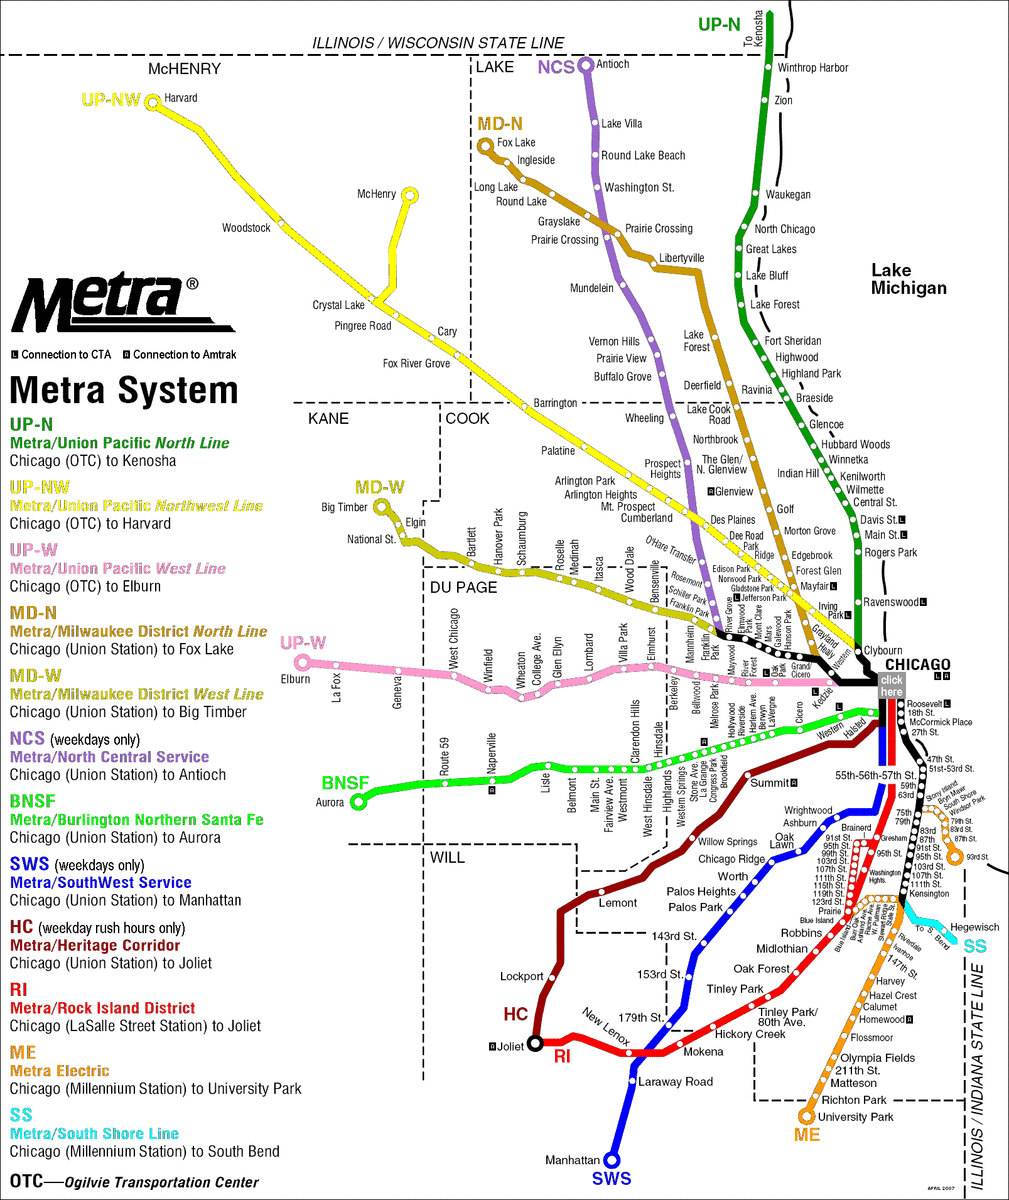 Route Map of Metra Commuter Service. Map color coded by original railroad.